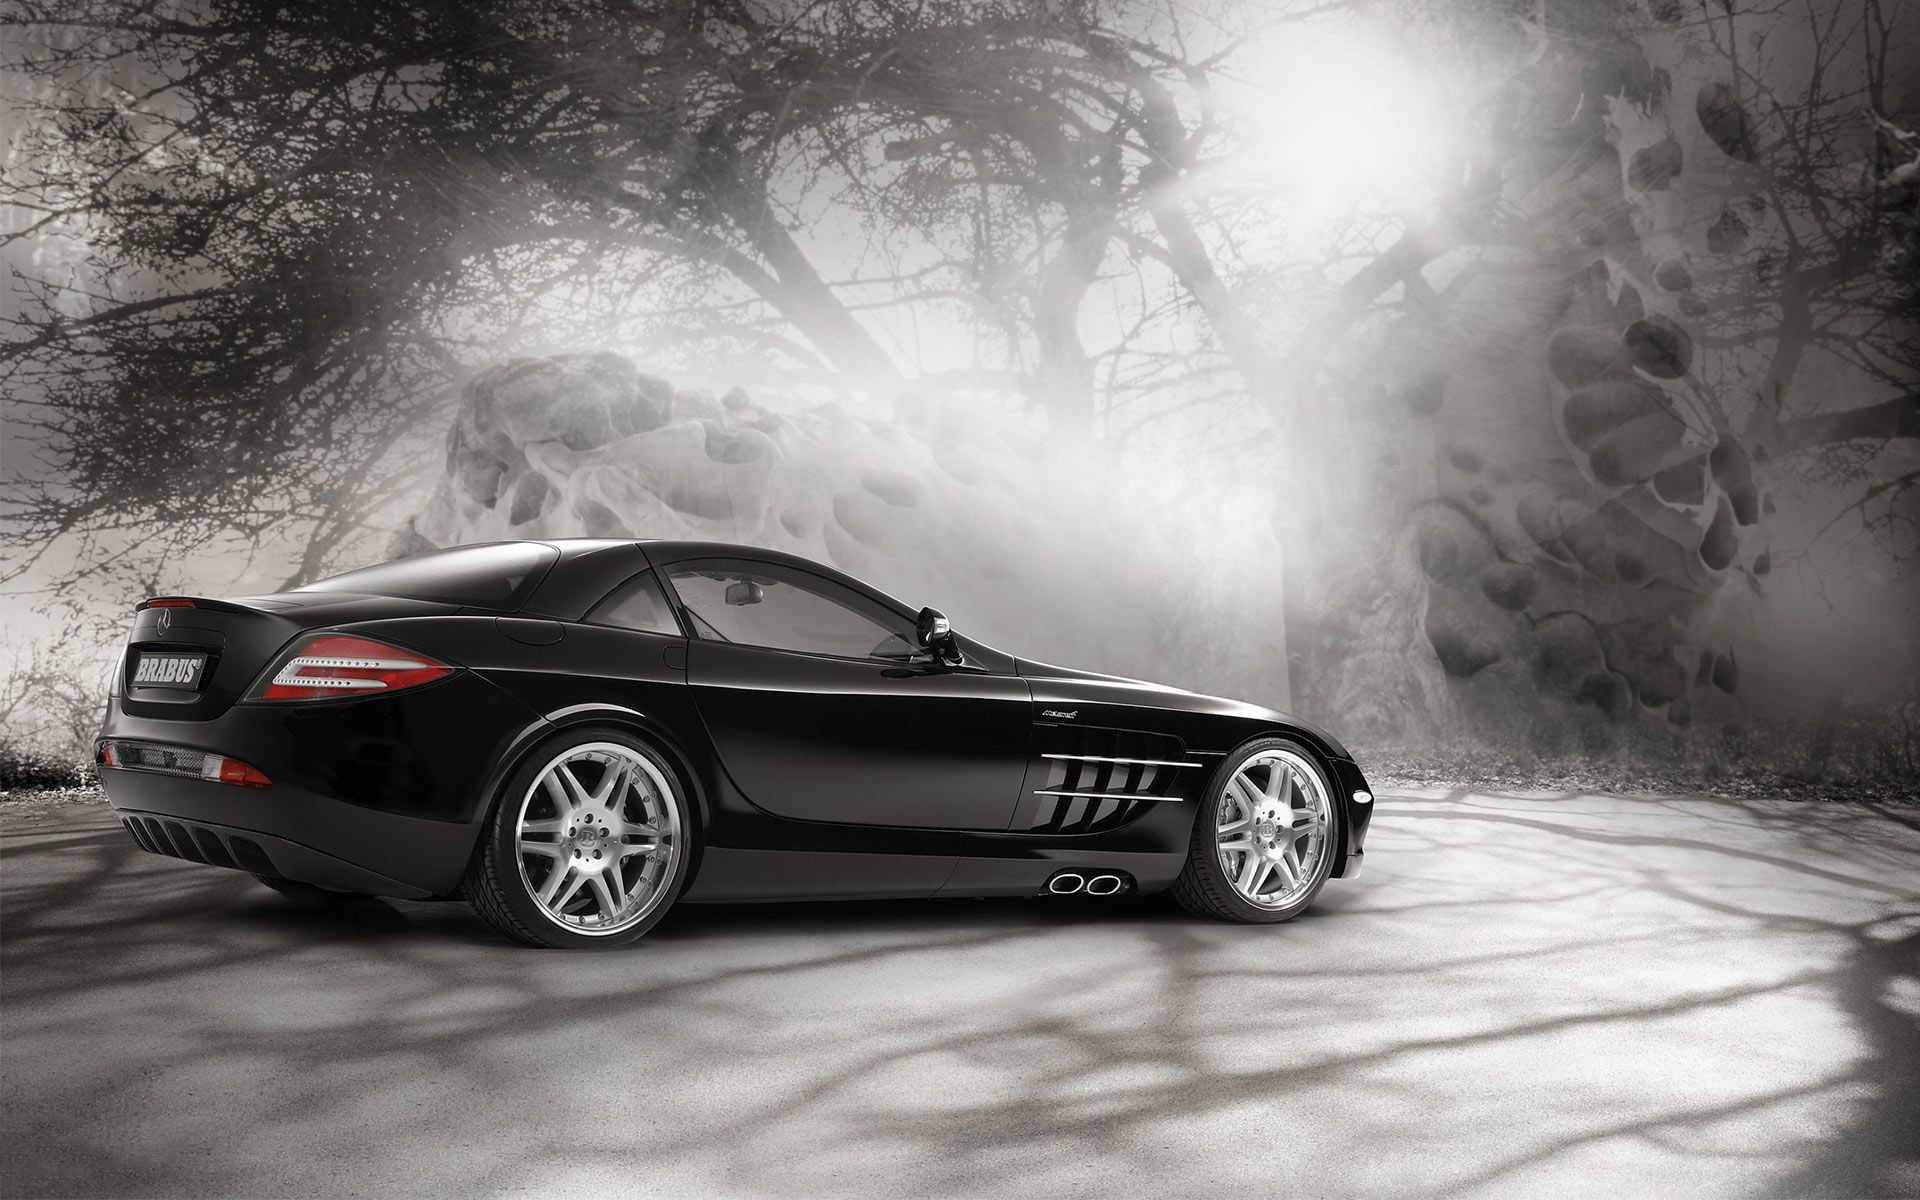 1920x1200, Mercedes Benz - Background Images For Photography - HD Wallpaper 